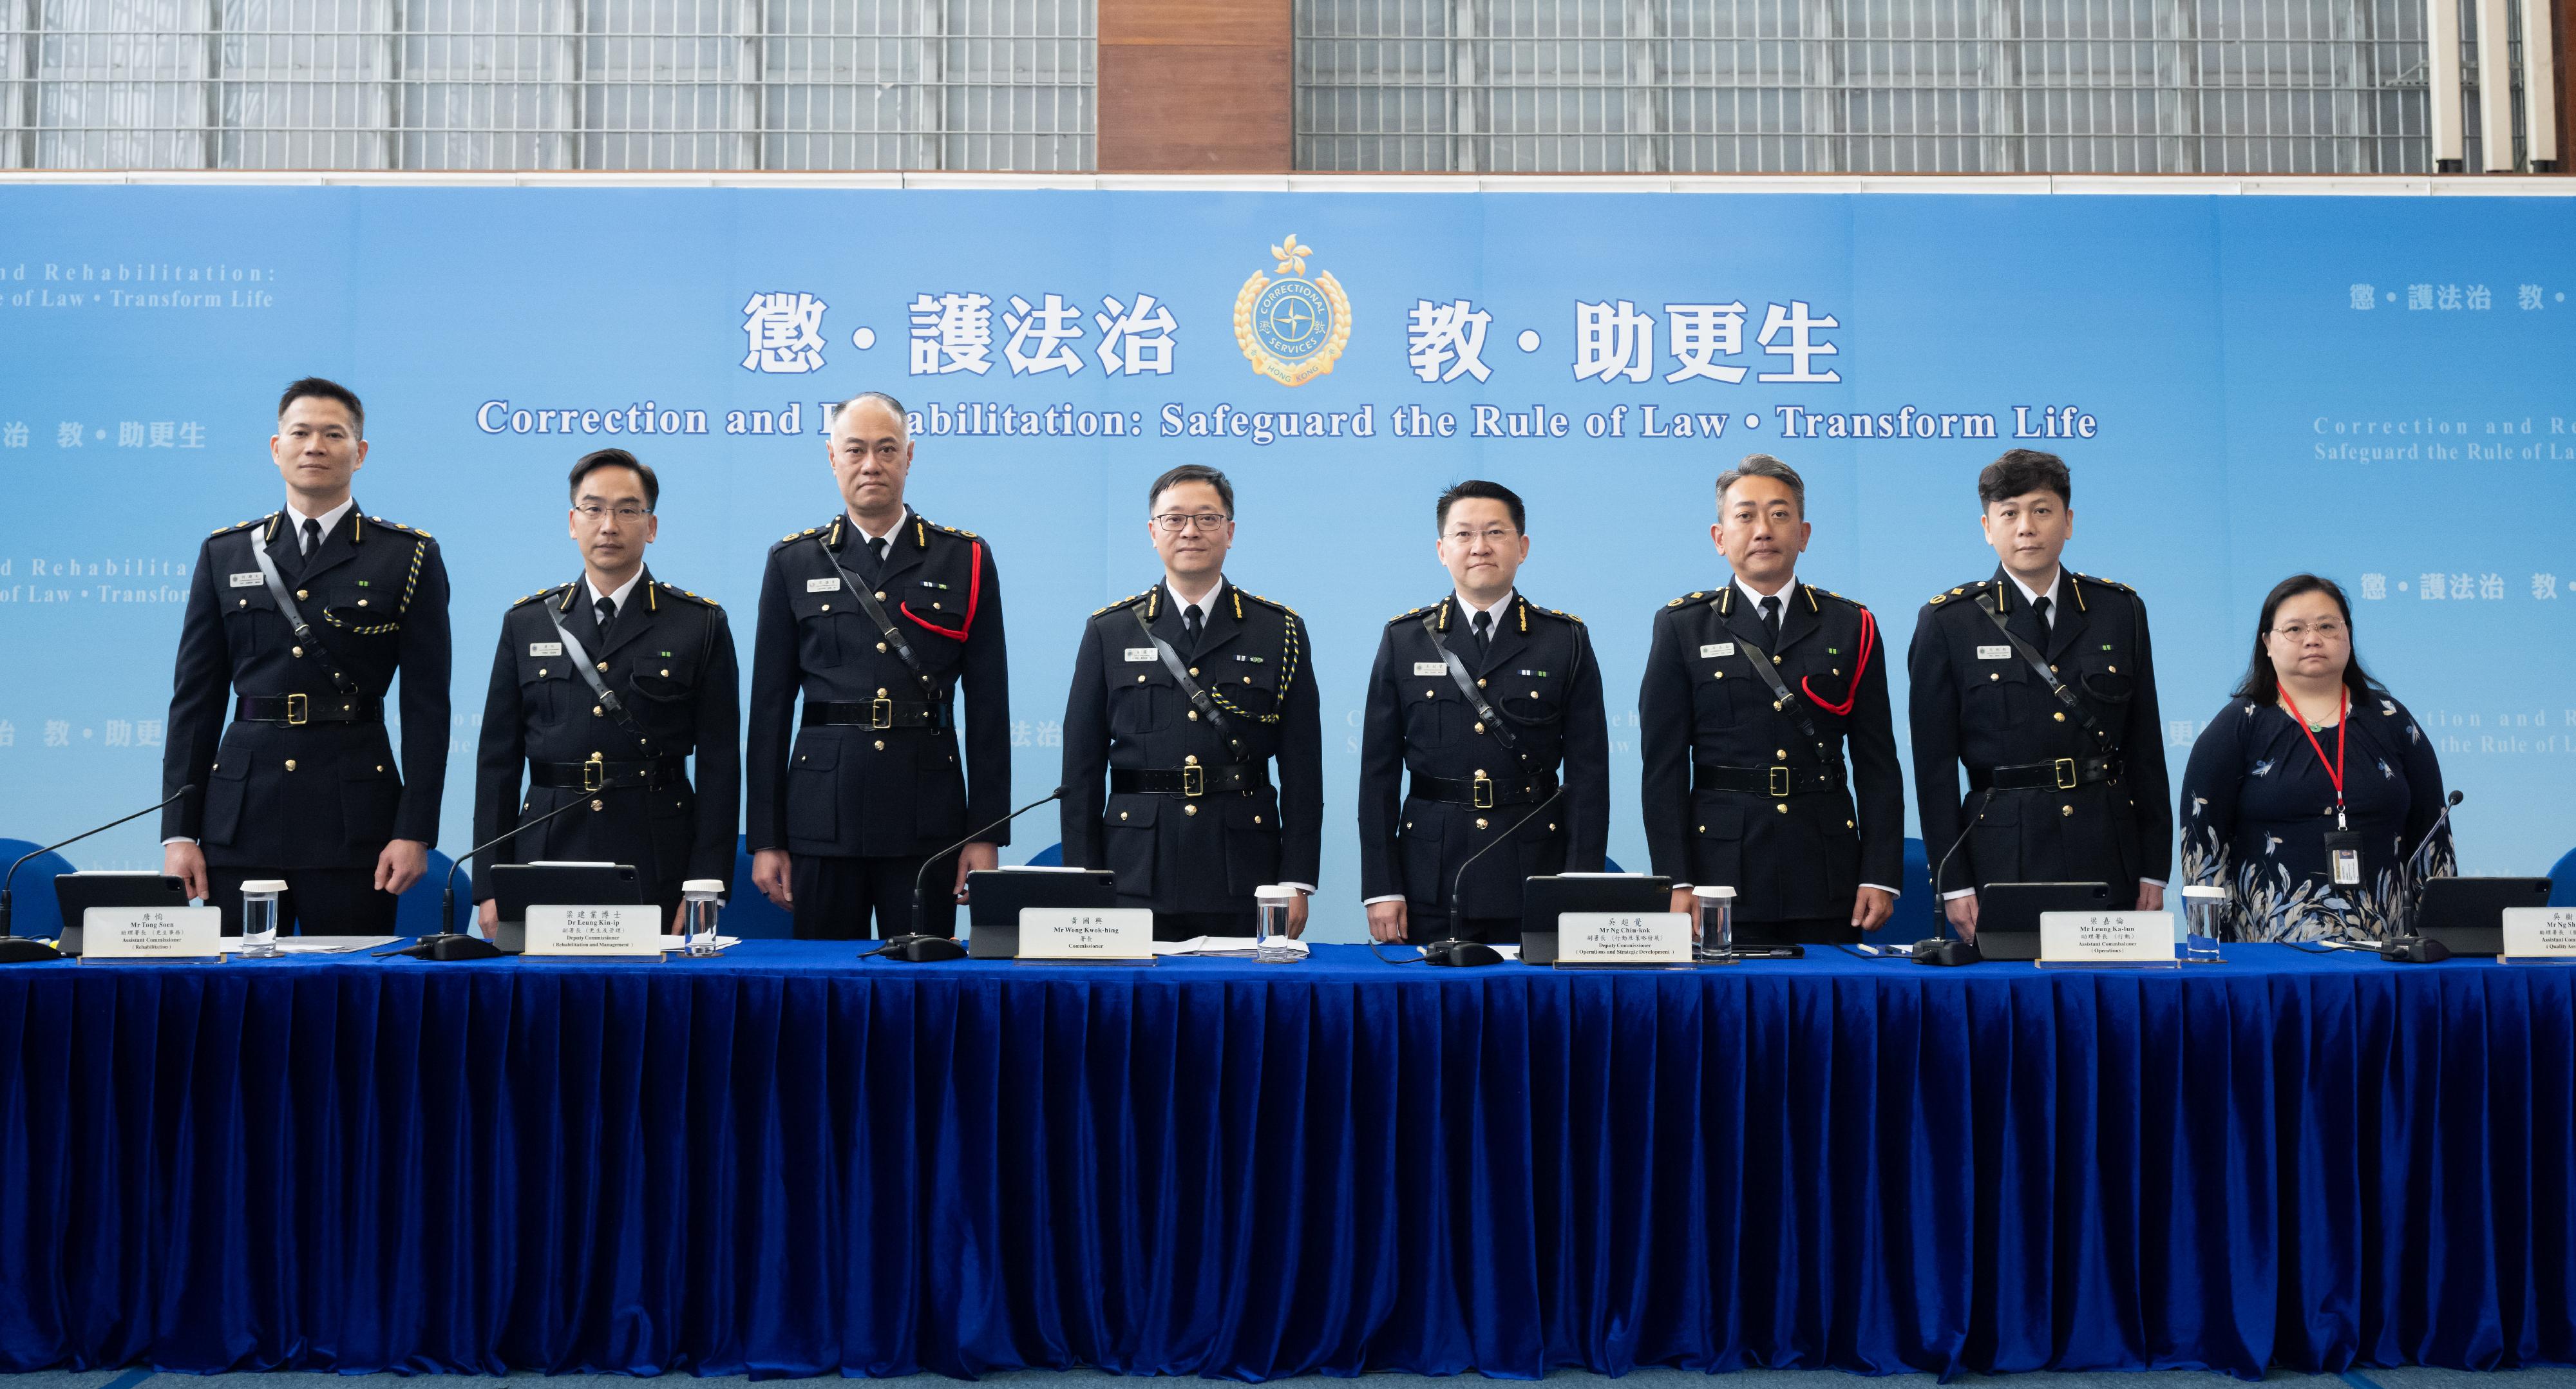 The Commissioner of Correctional Services, Mr Wong Kwok-hing, today (February 22) hosted the annual press conference on the Correctional Services Department's work in 2023. Directorate officers attending the press conference were (from left) the Assistant Commissioner (Human Resource), Mr Ho Kwok-man; the Assistant Commissioner (Rehabilitation), Mr Tong Soen; the Deputy Commissioner (Rehabilitation and Management), Dr Leung Kin-ip; Mr Wong; the Deputy Commissioner (Operations and Strategic Development), Mr Ng Chiu-kok; the Assistant Commissioner (Operations), Mr Leung Ka-lun; the Assistant Commissioner (Quality Assurance), Mr Ng Shu-fan, and the Civil Secretary, Dr Janet Wong.